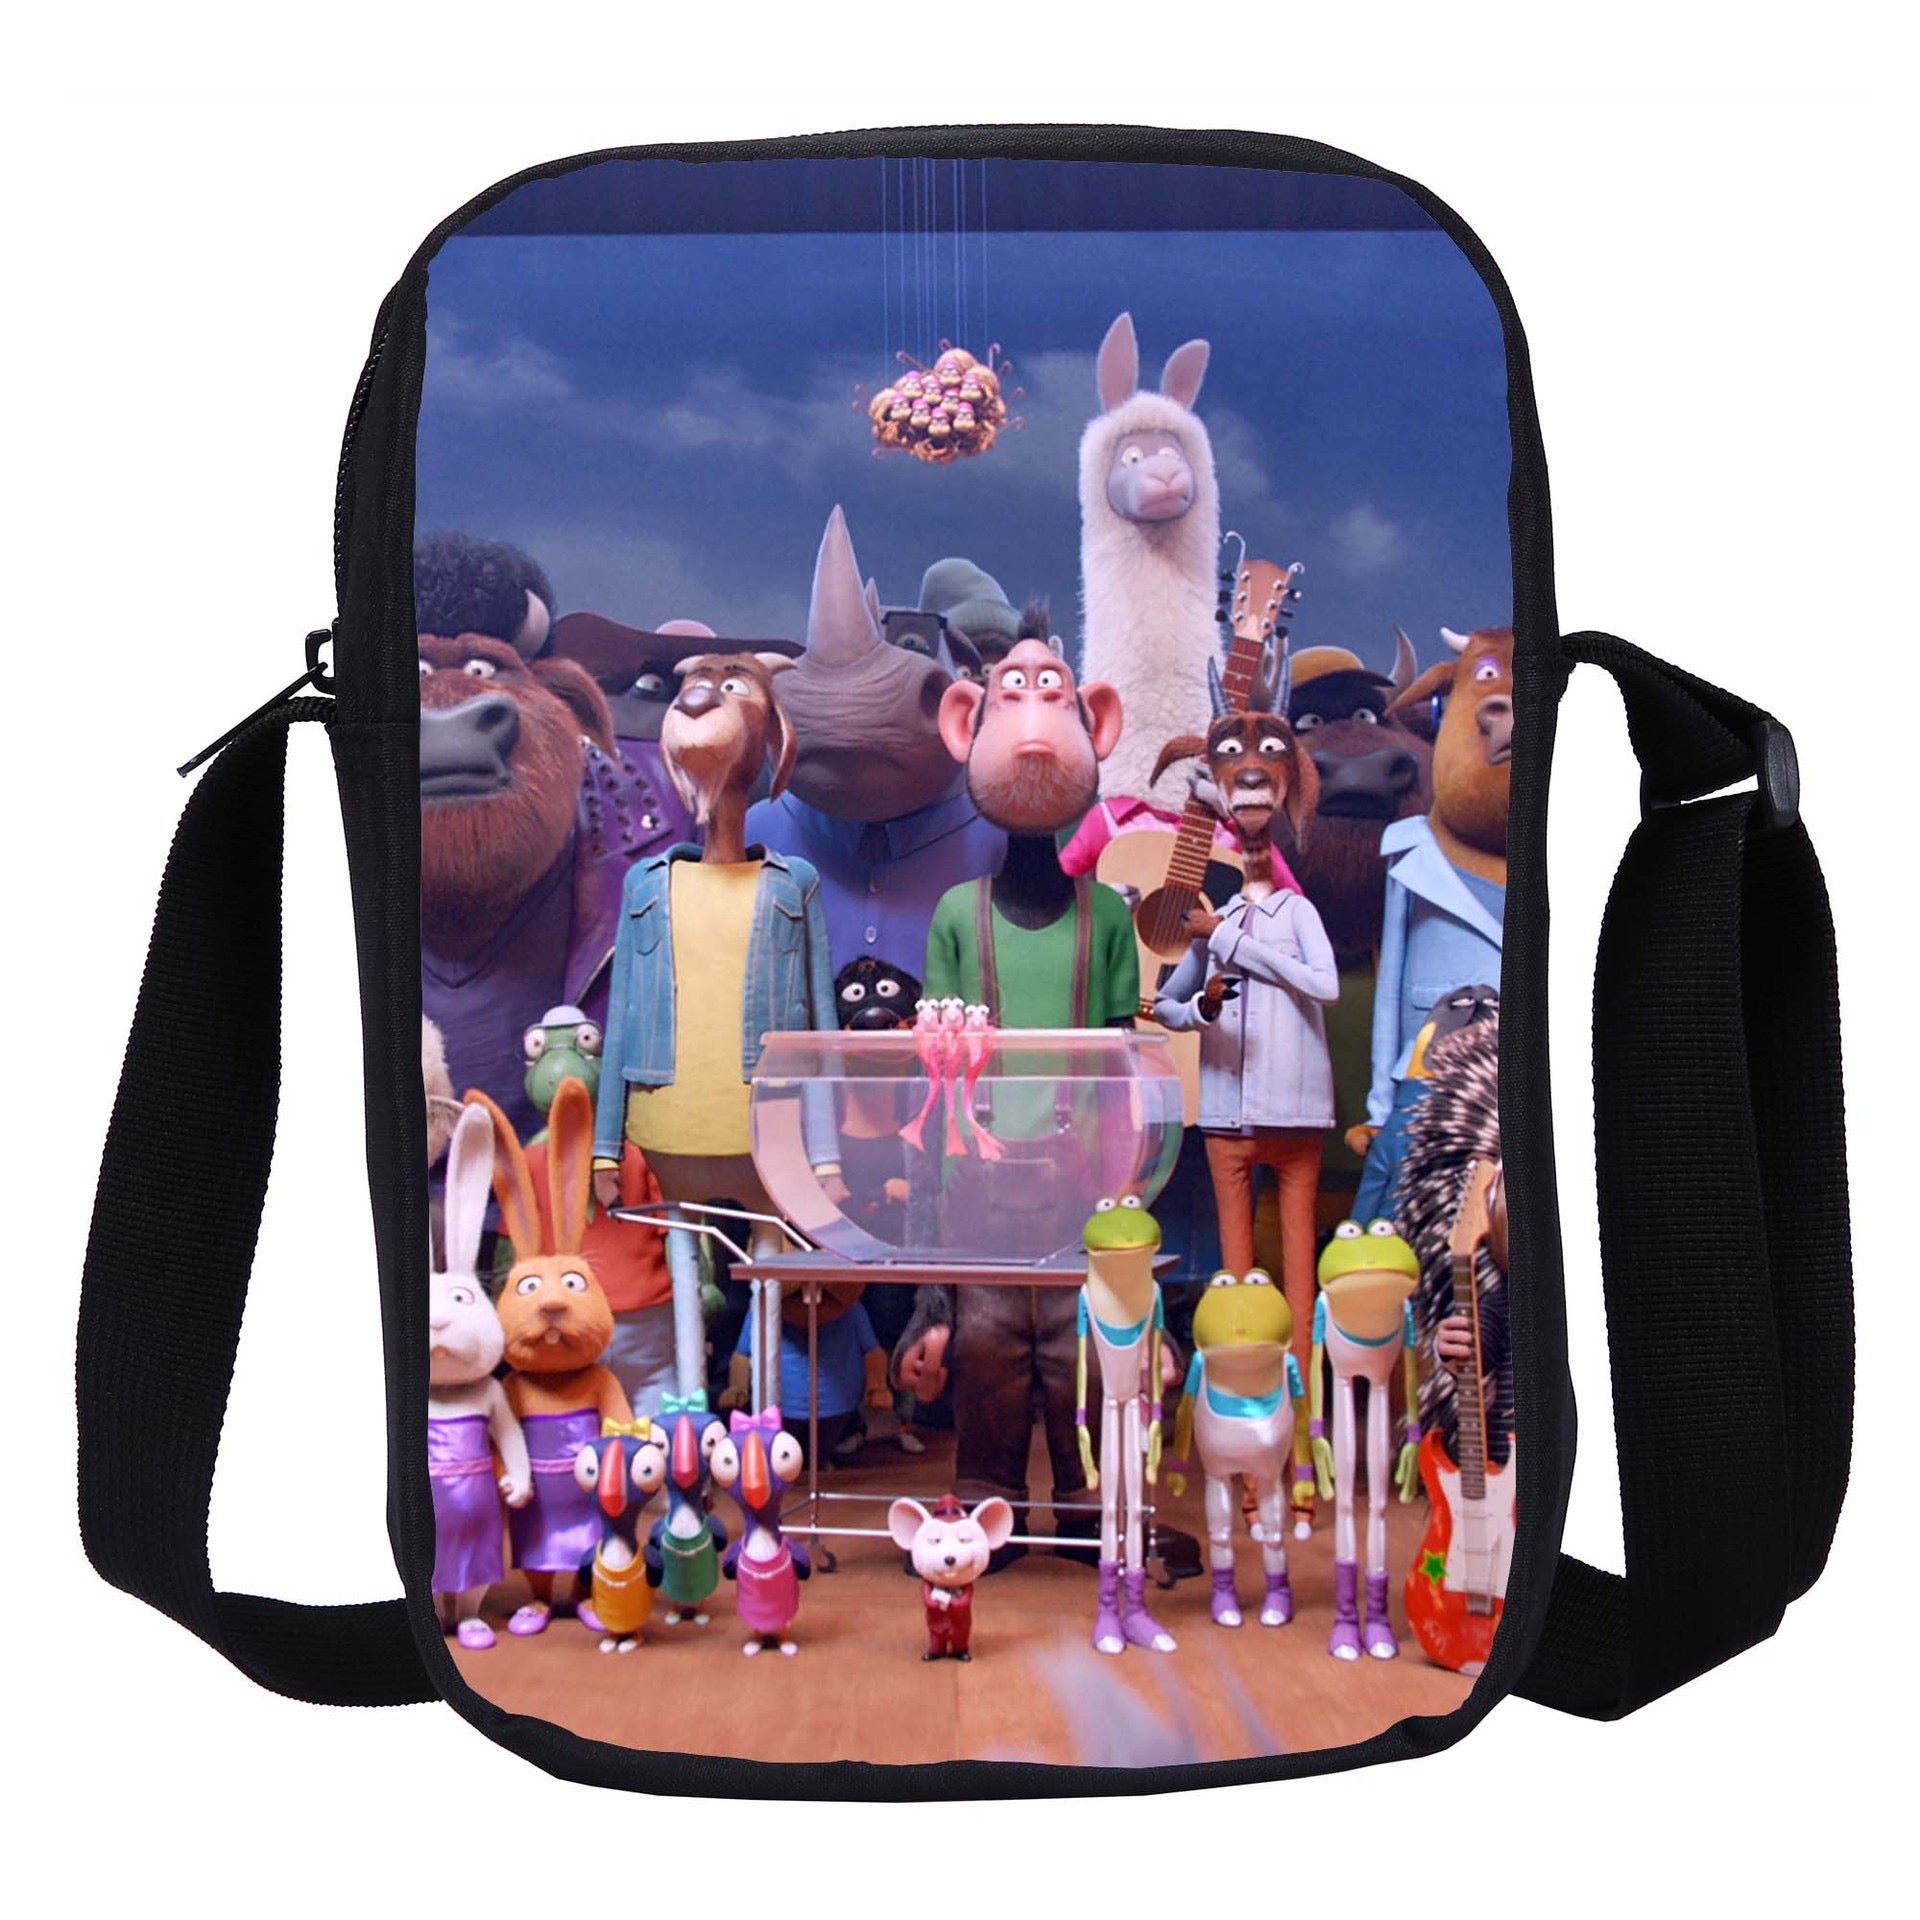 Sing 2 Lunch Box Bag Lunch Tote For Kids